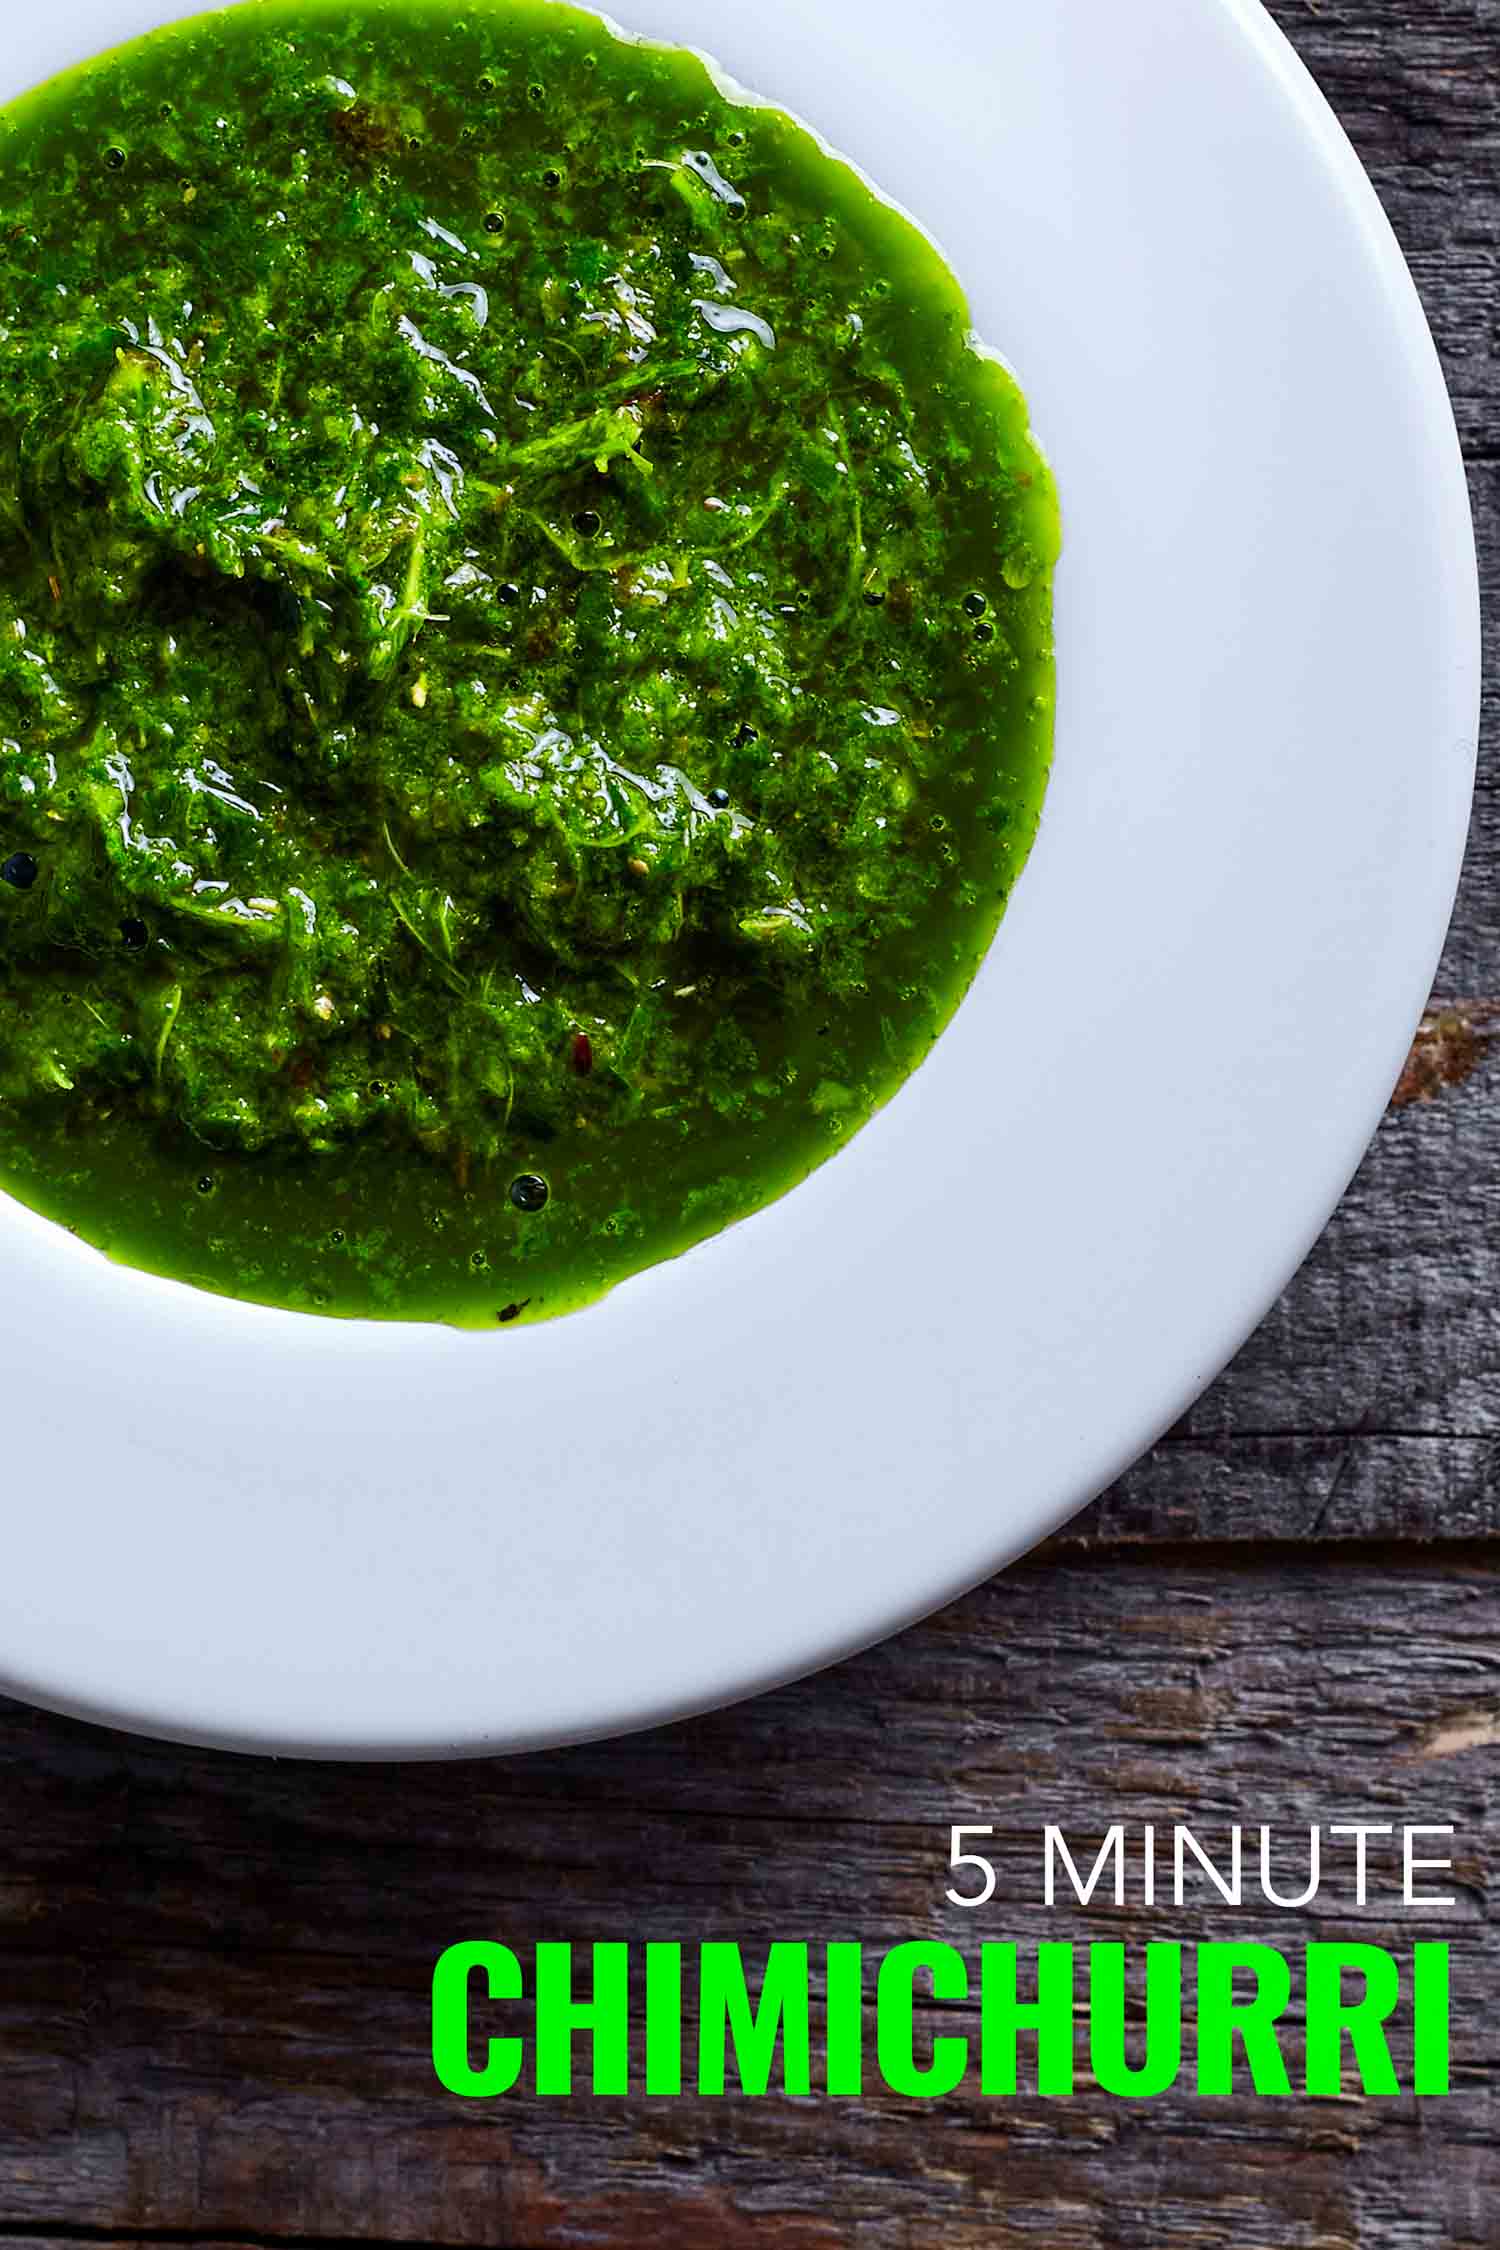 Chimichurri in a white bowl on a wooden background.